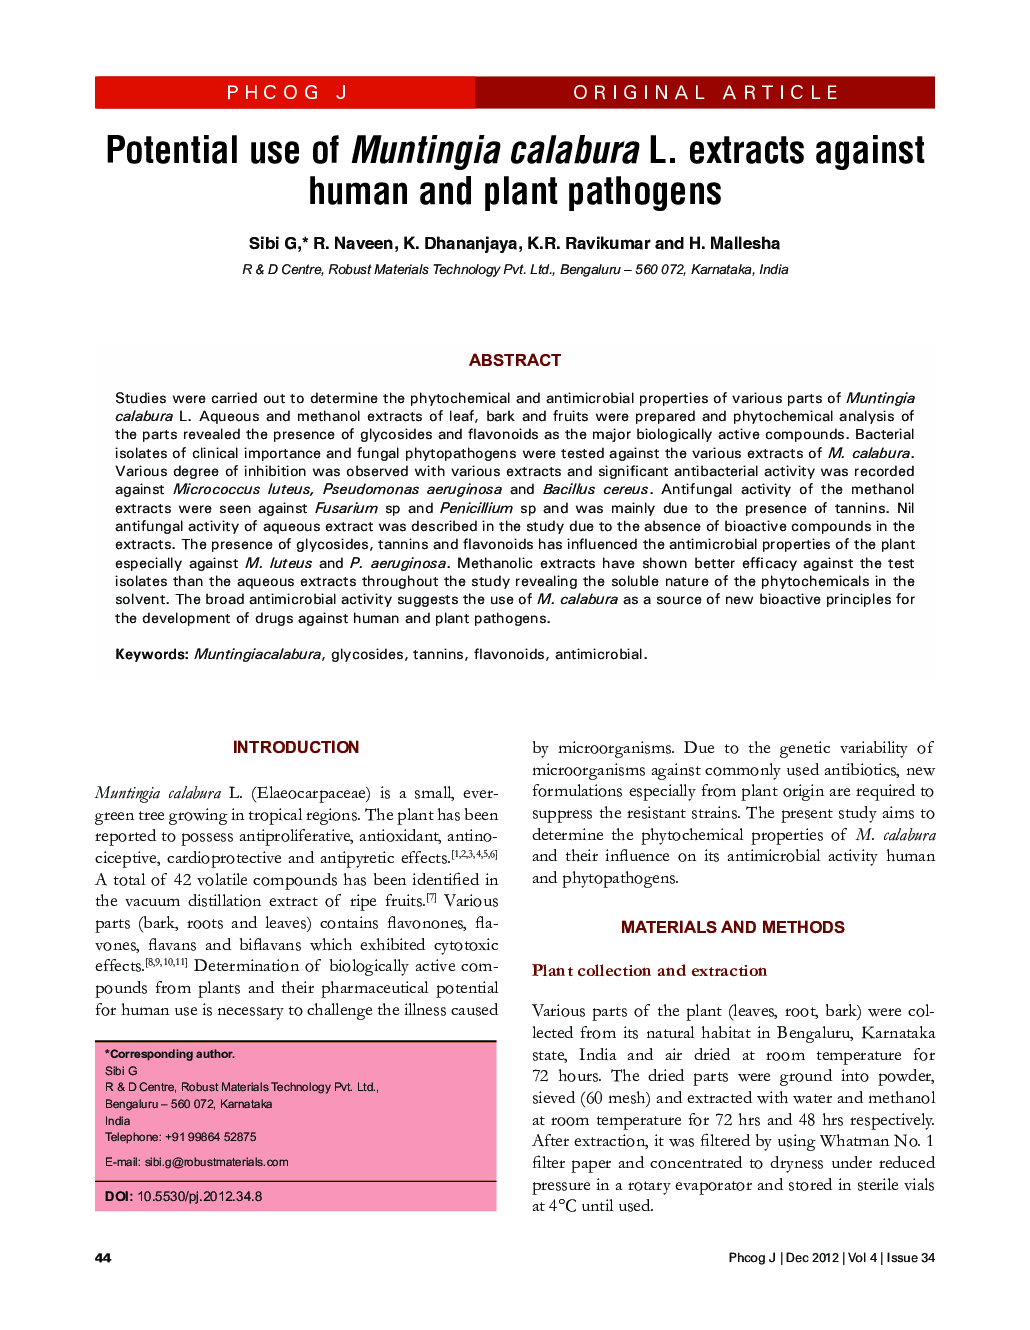 Potential use of Muntingia calabura L. extracts against human and plant pathogens